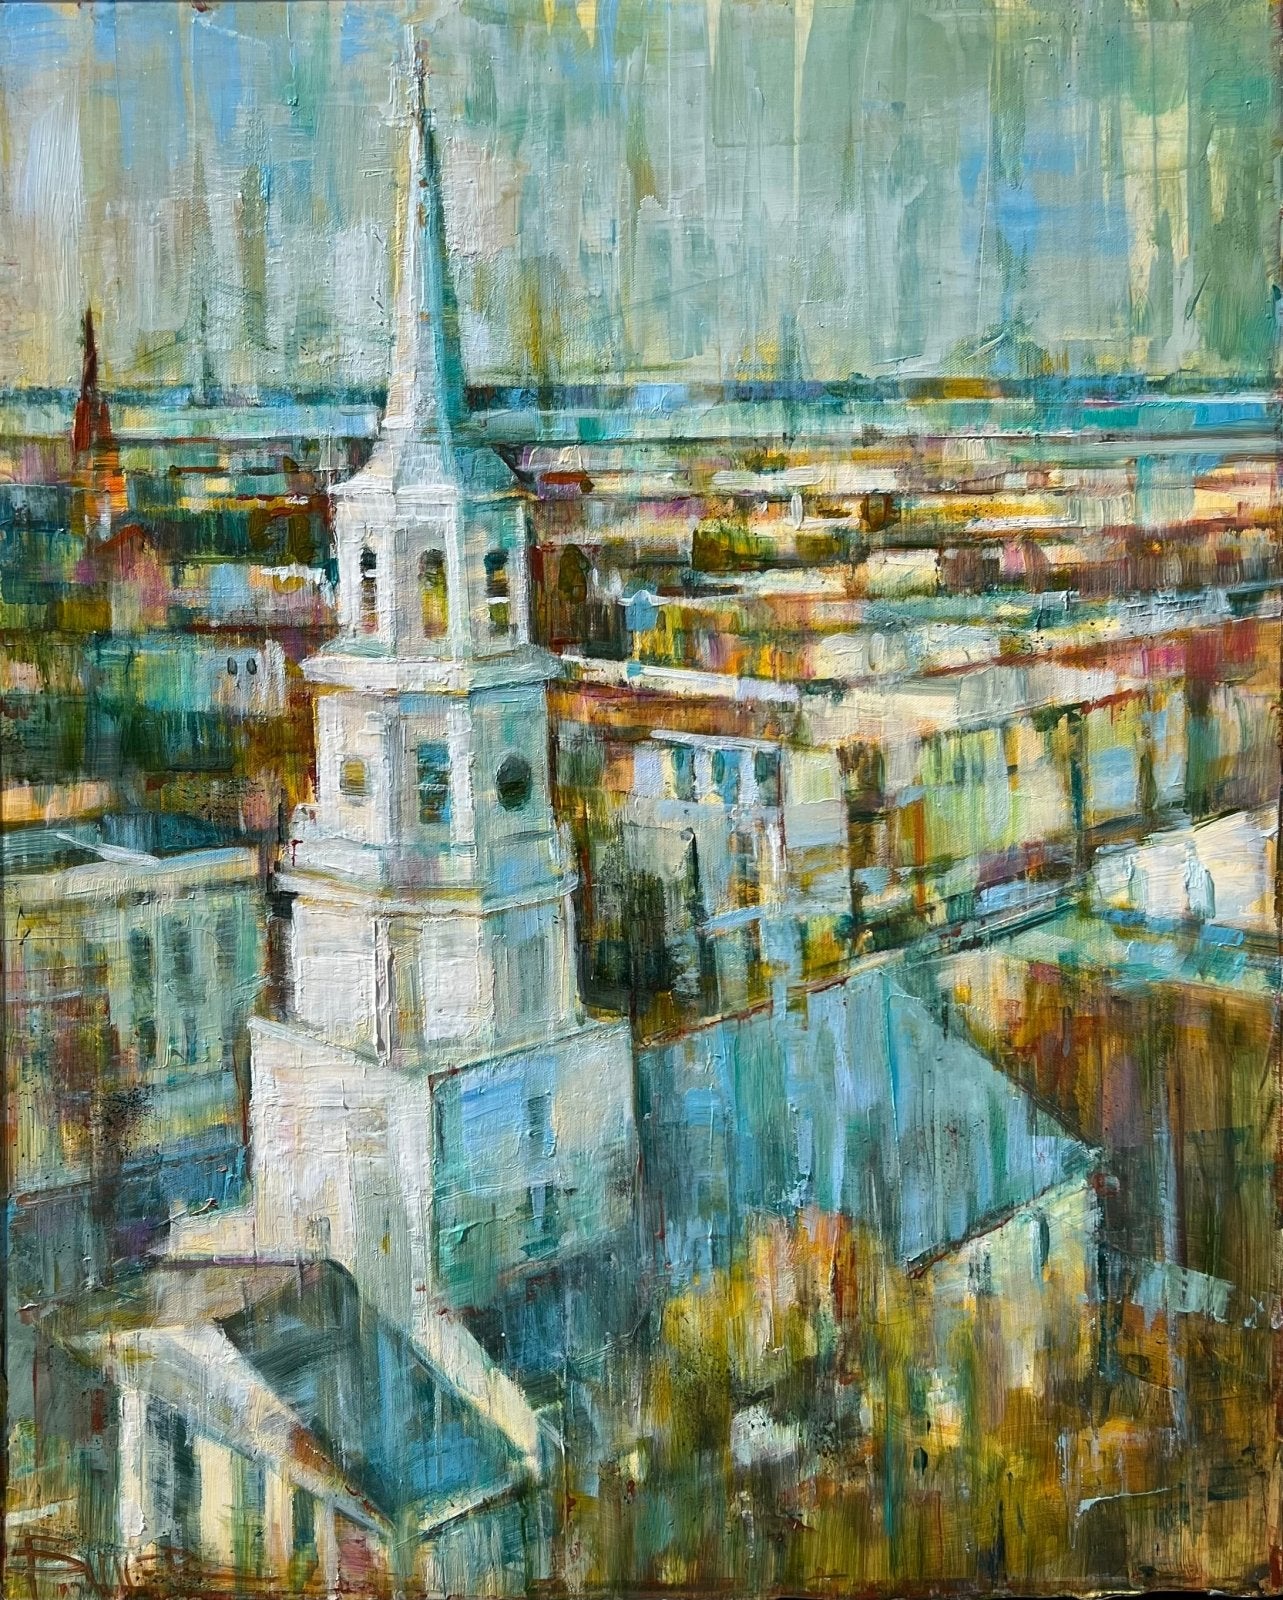 Sky-High Sanctuary by Curt Butler at LePrince Galleries